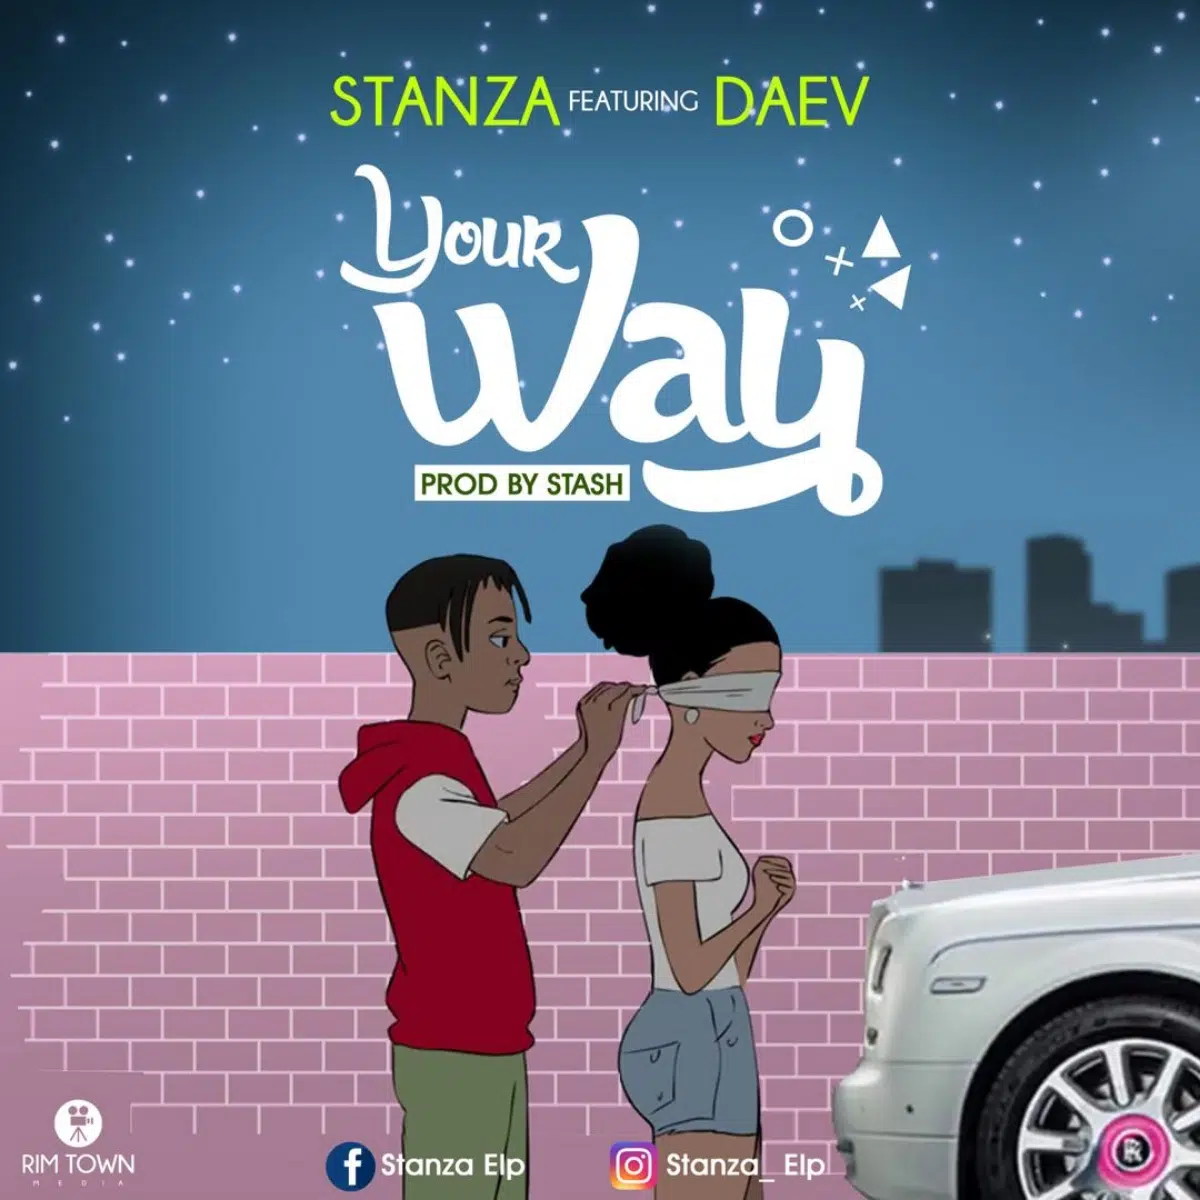 DOWNLOAD: Stanza Elp Ft. Daev  Zambia – “Your Way” Mp3